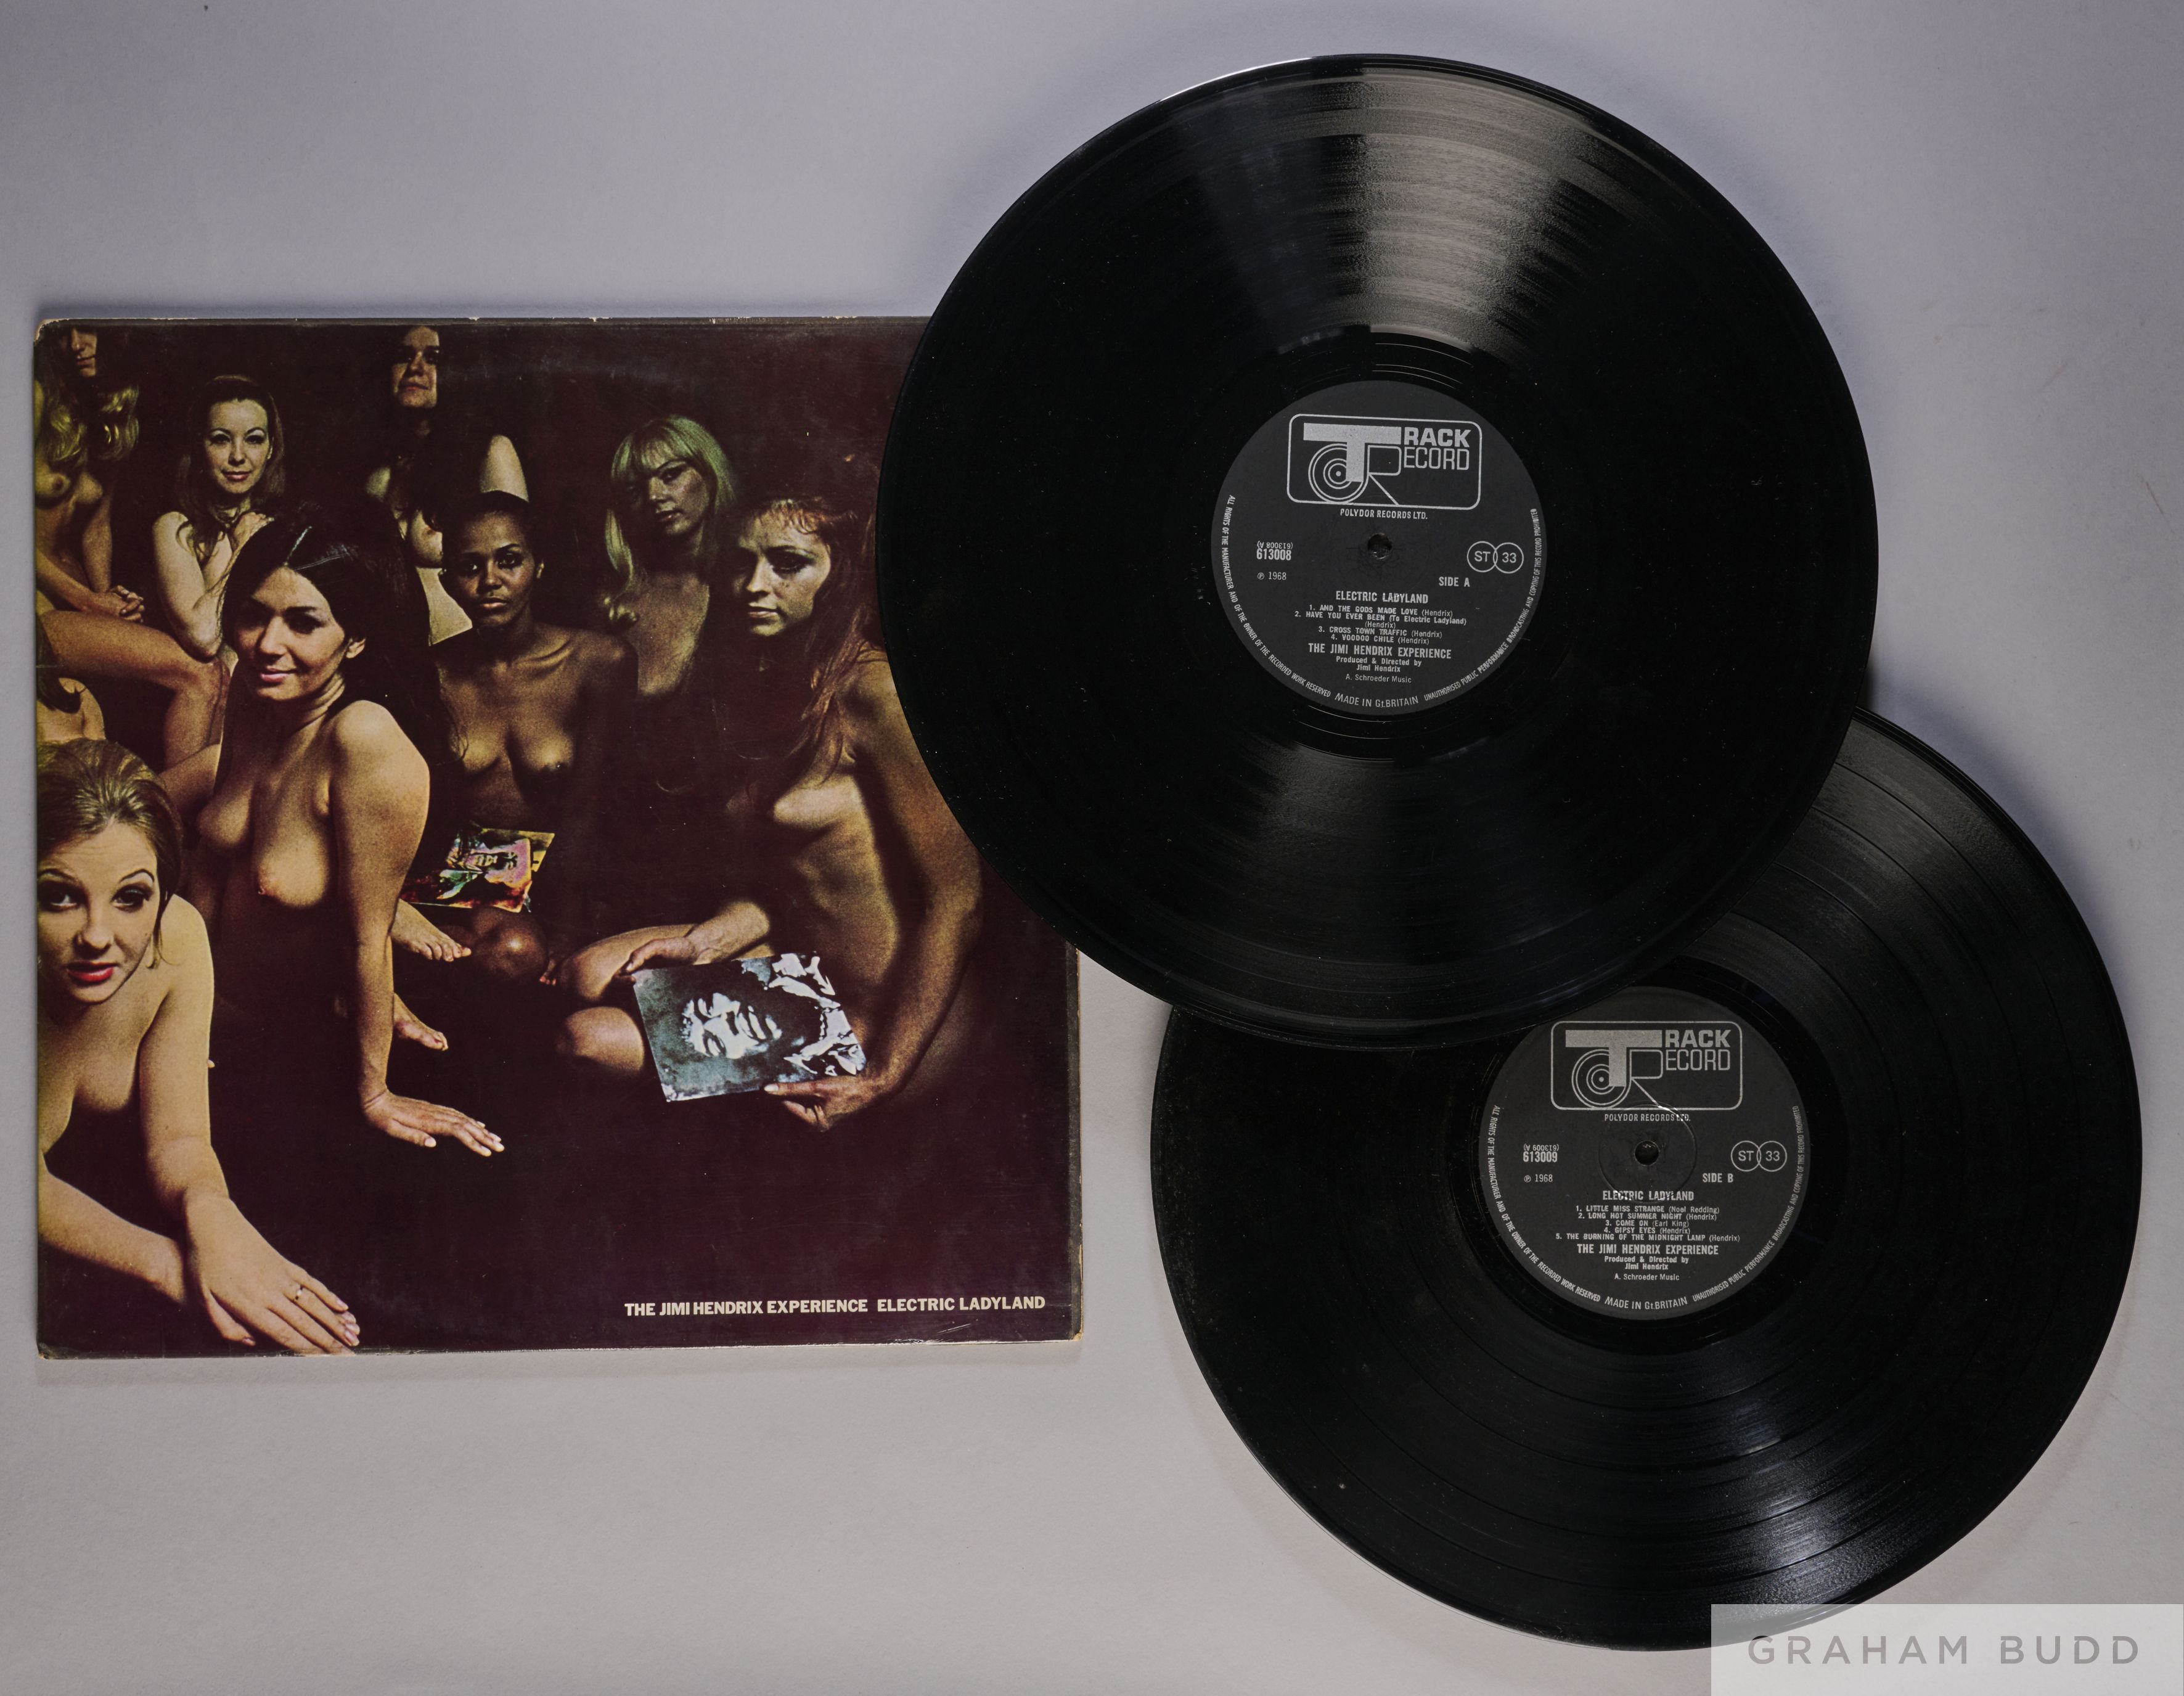 The Jimi Hendrix Experience Electric Ladyland Track Records 1968